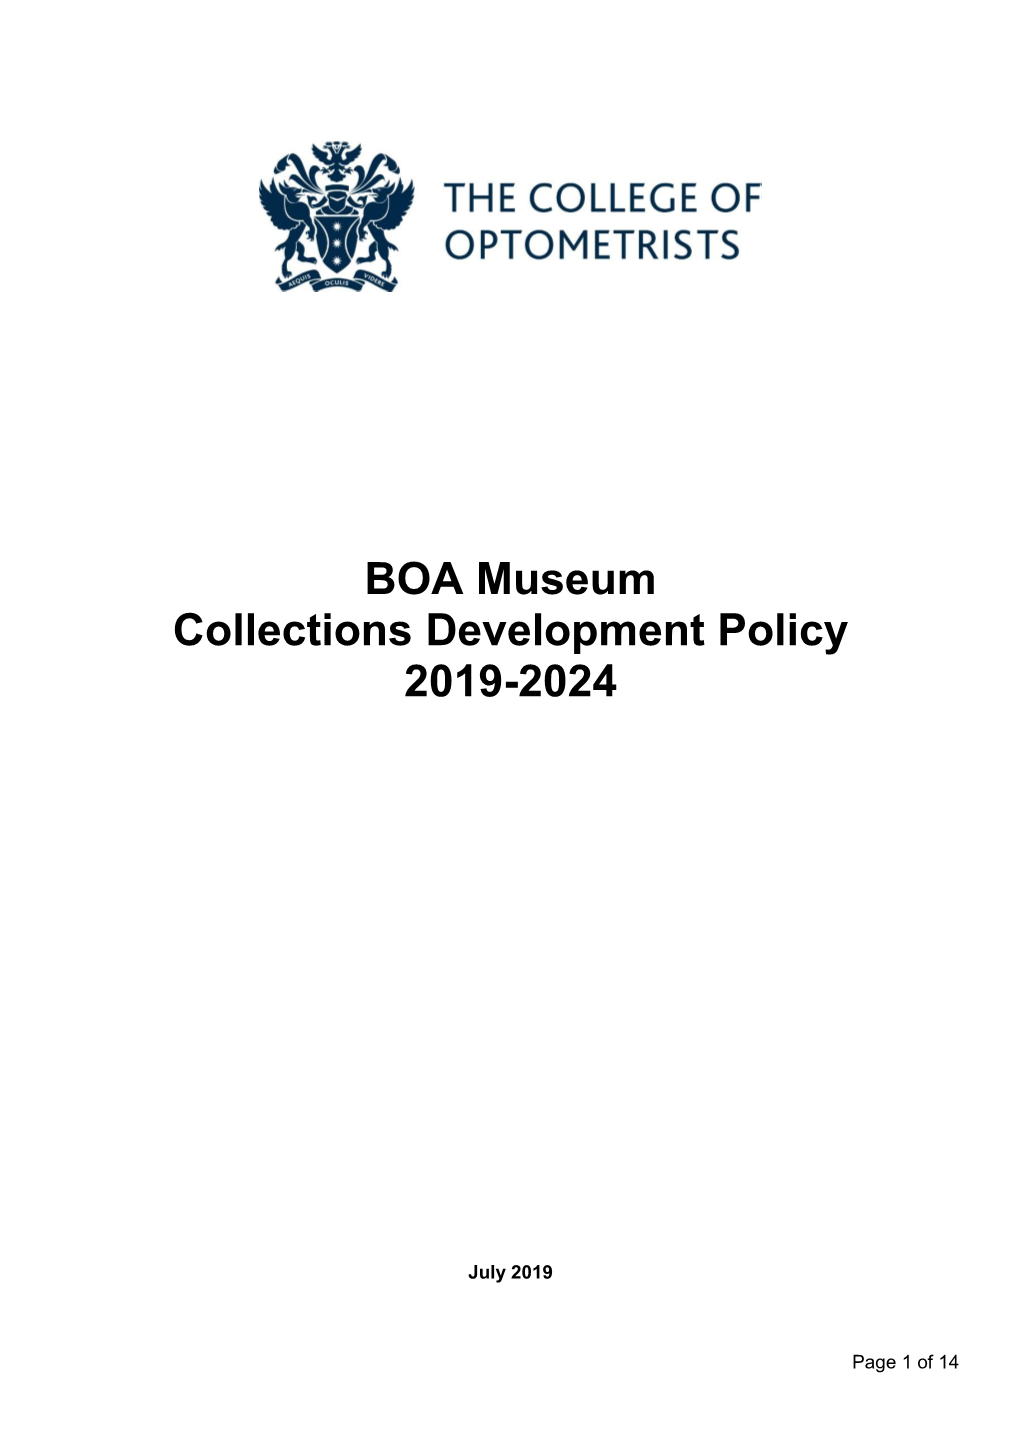 BOA Museum Collections Development Policy 2019-2024